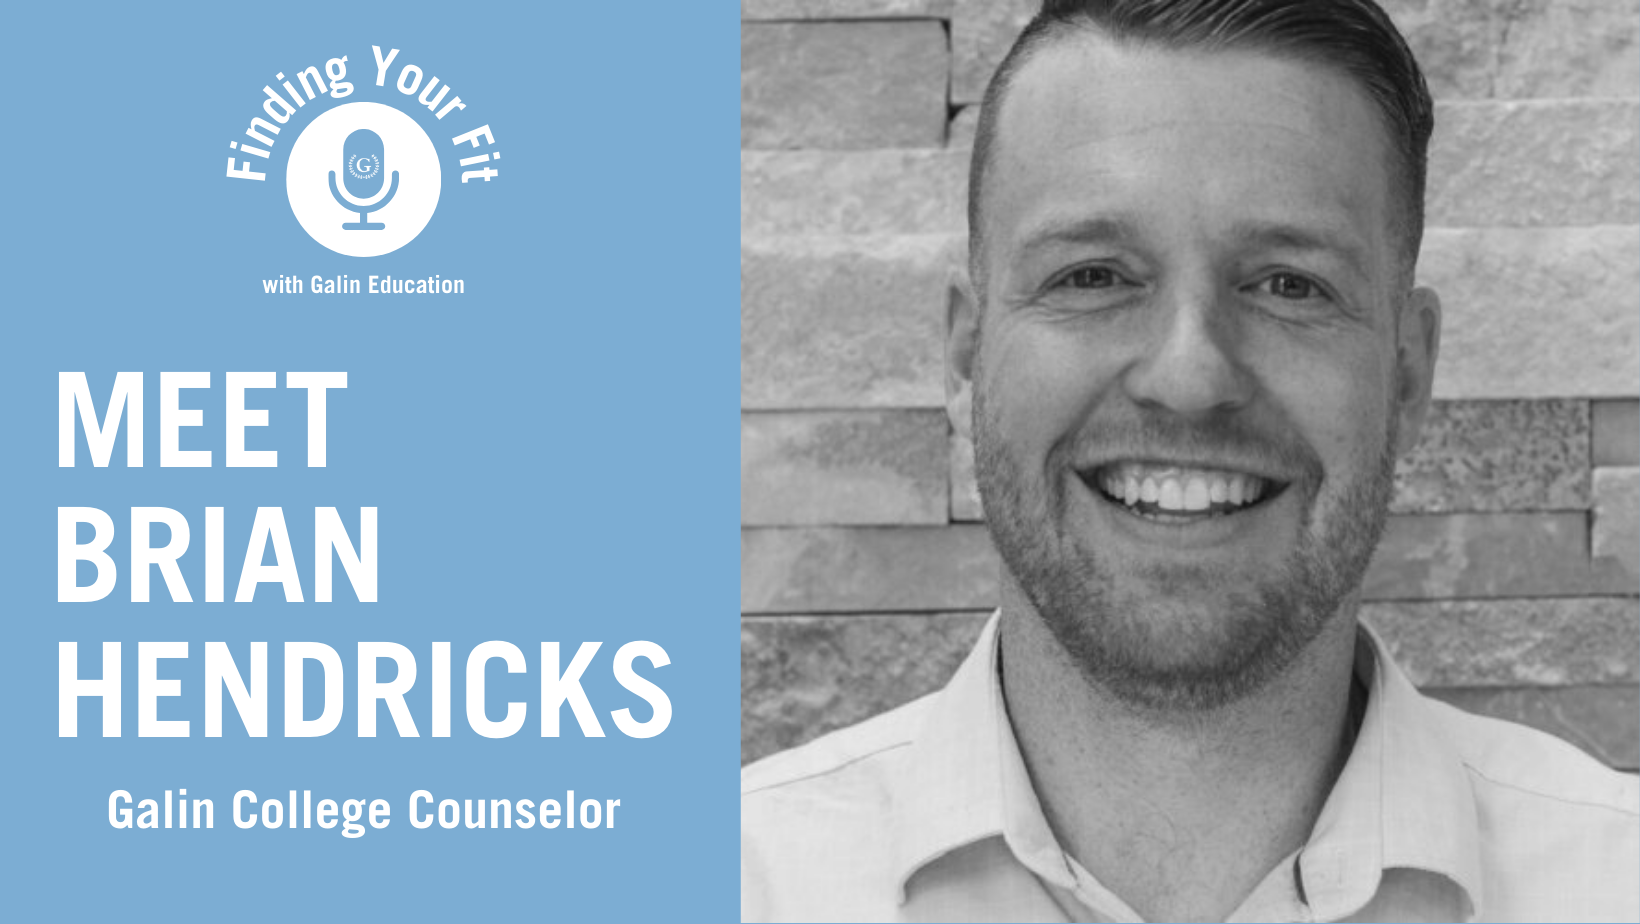 Finding Your Fit: Get to Know College Counselor Brian Hendricks!